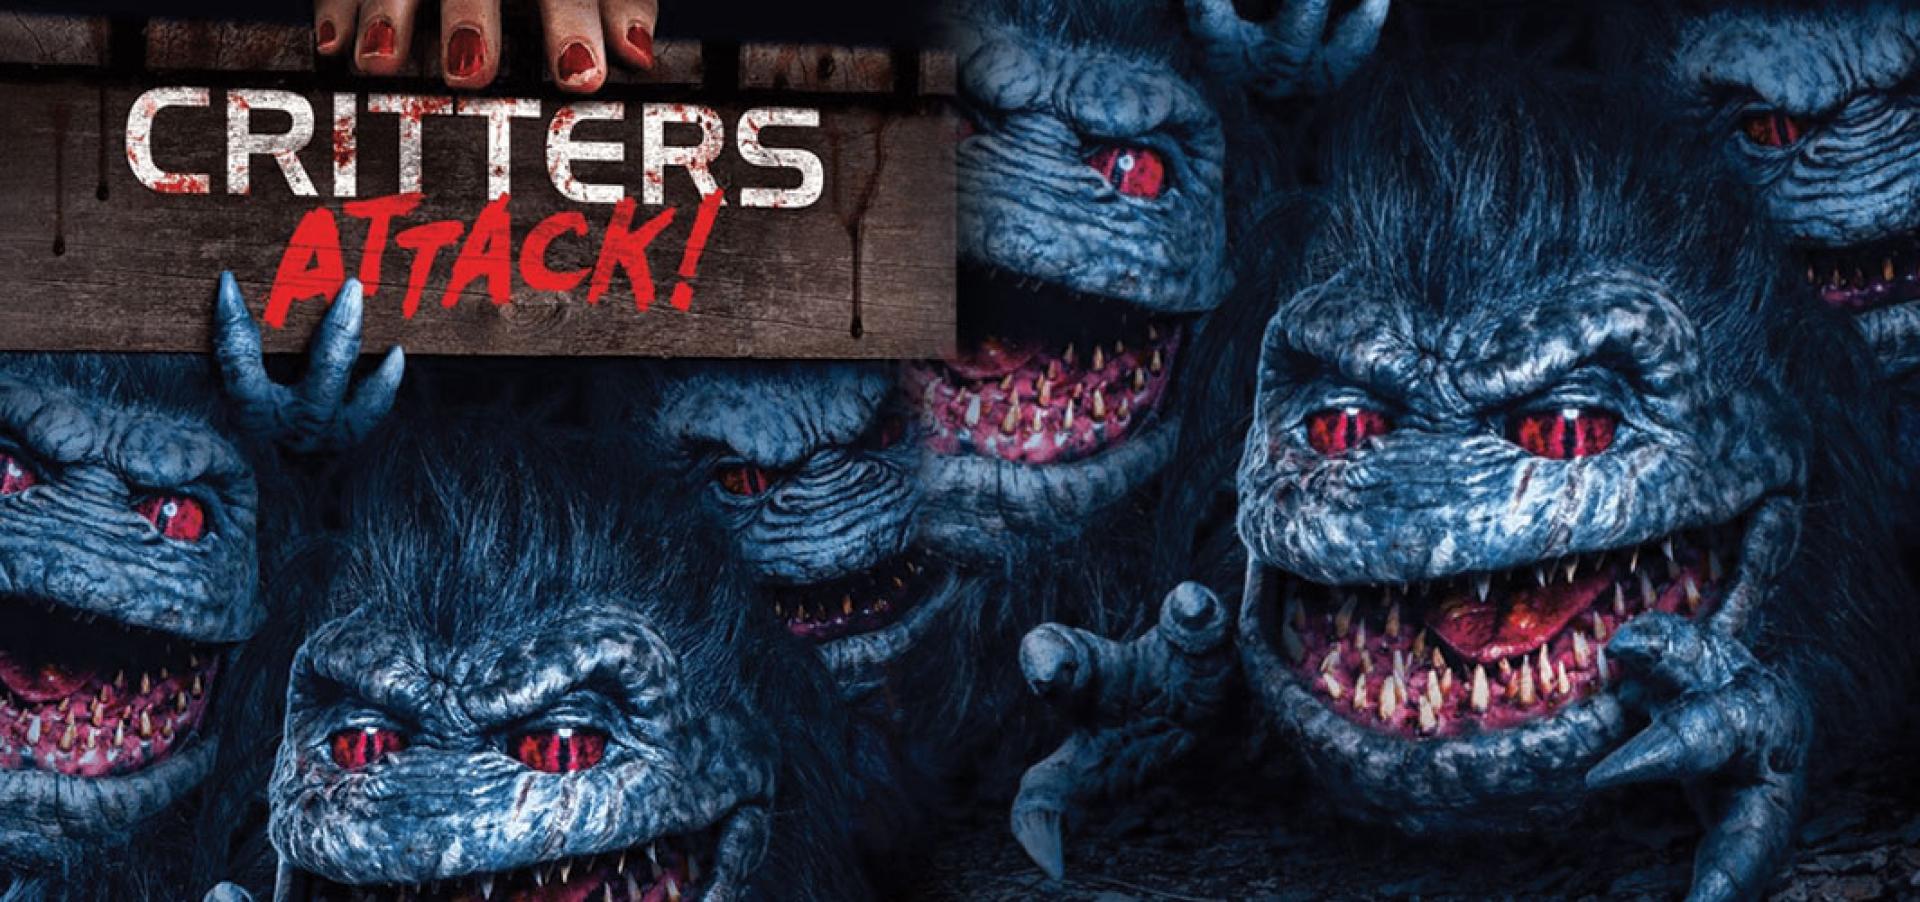 Critters: Attack! (2019)